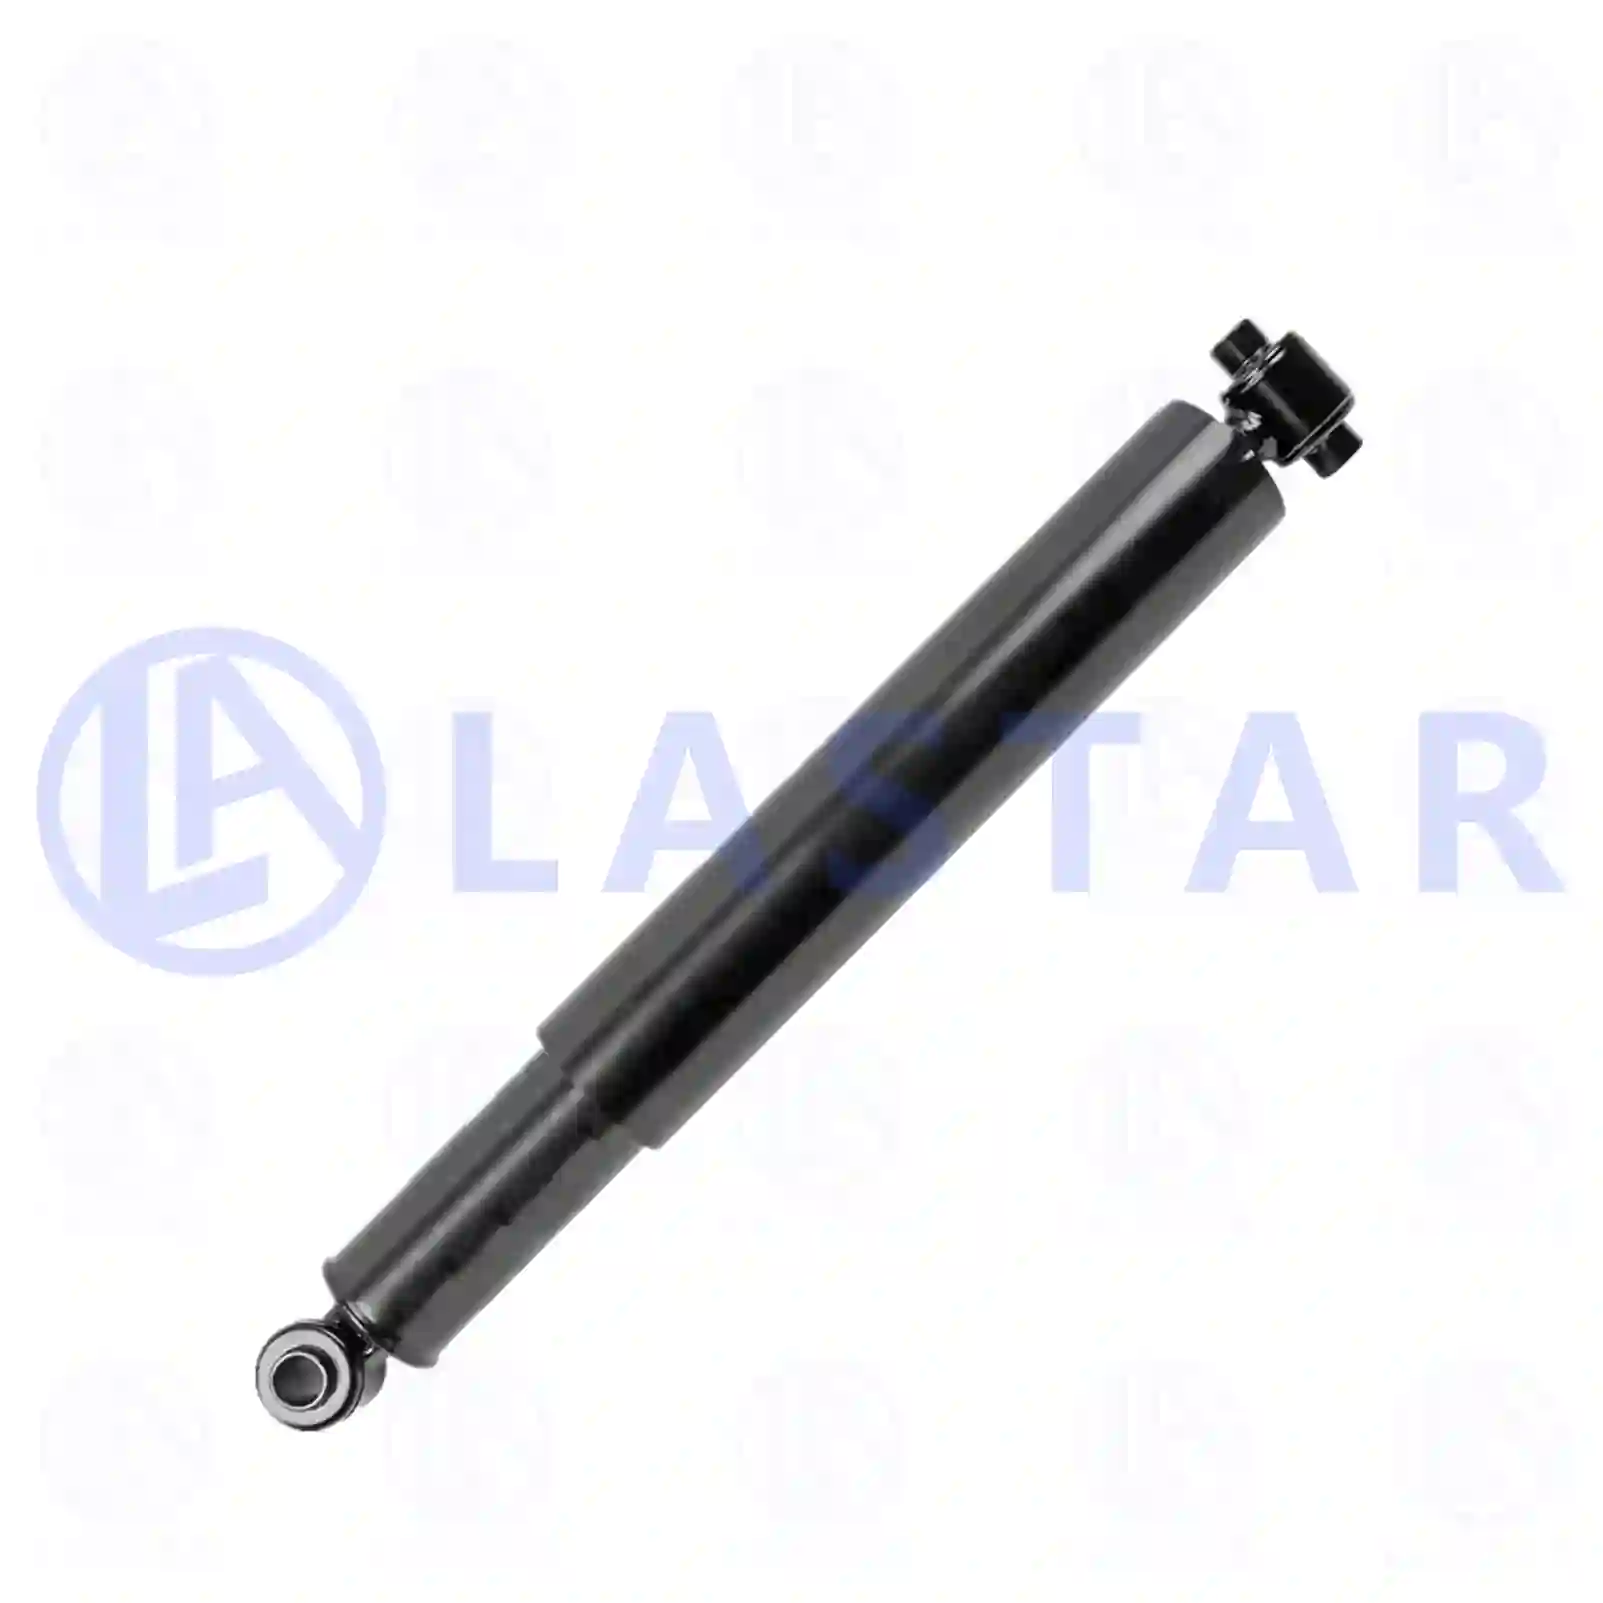 Shock absorber, 77727874, 0053263000, 6733266110, 6733266120, 6733266130, 6743266000, 6743266100, 6743266120, 6743266140, 6763261300, 9703260000, 9703260200, 9703260700, ZG41598-0008 ||  77727874 Lastar Spare Part | Truck Spare Parts, Auotomotive Spare Parts Shock absorber, 77727874, 0053263000, 6733266110, 6733266120, 6733266130, 6743266000, 6743266100, 6743266120, 6743266140, 6763261300, 9703260000, 9703260200, 9703260700, ZG41598-0008 ||  77727874 Lastar Spare Part | Truck Spare Parts, Auotomotive Spare Parts